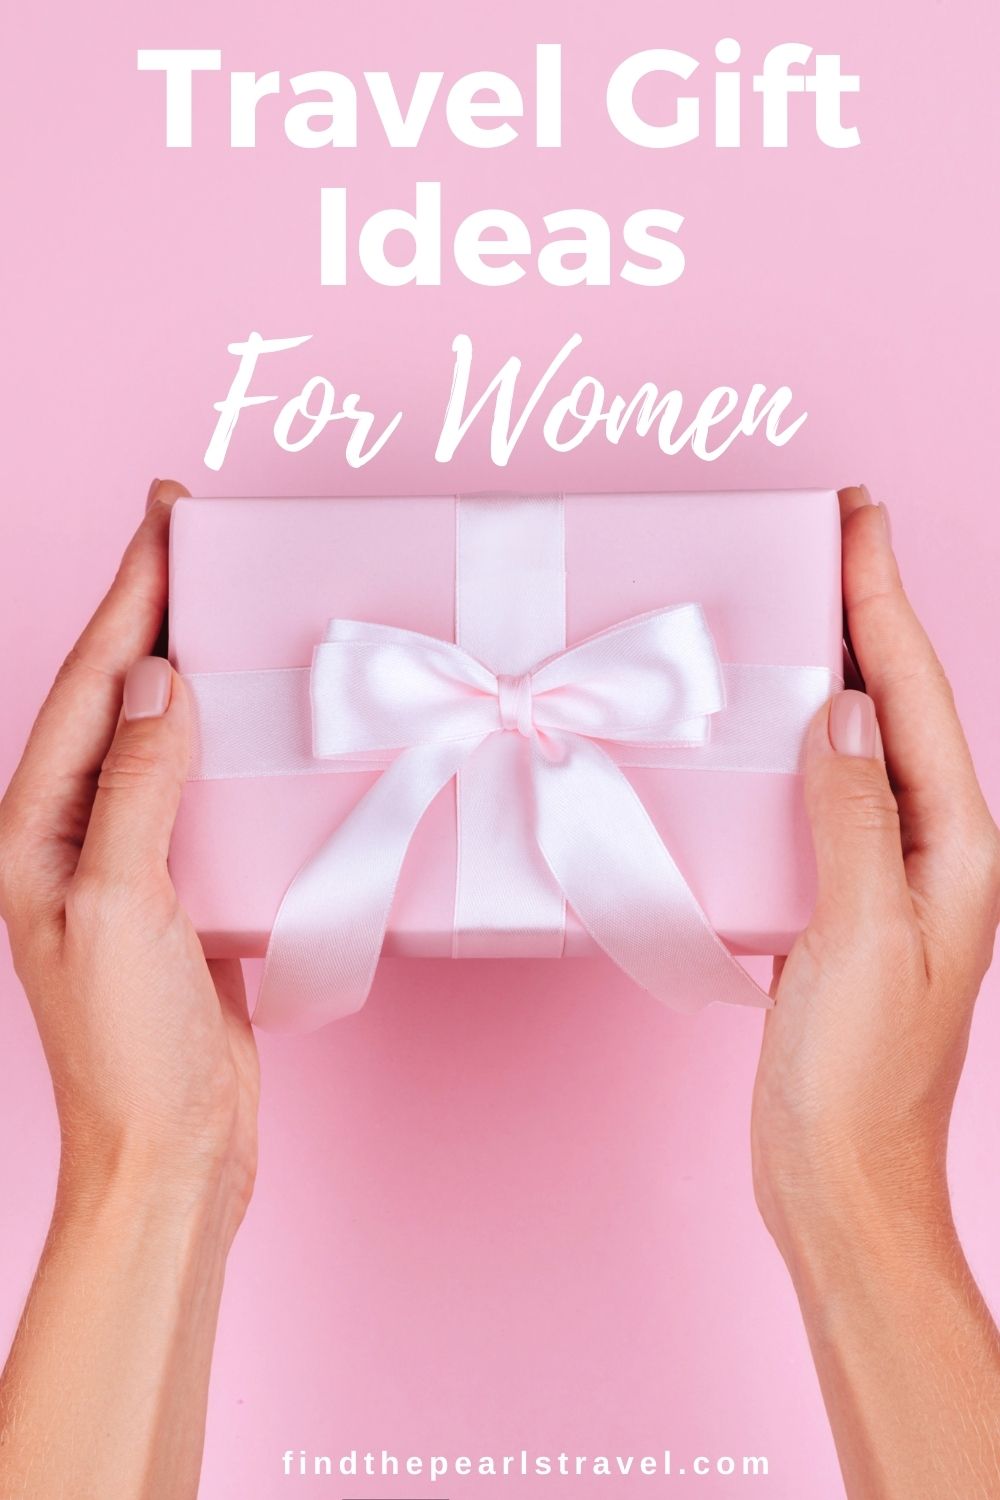 Best Travel Gifts for Women (That She Will Love!) 2020 Gift Guide